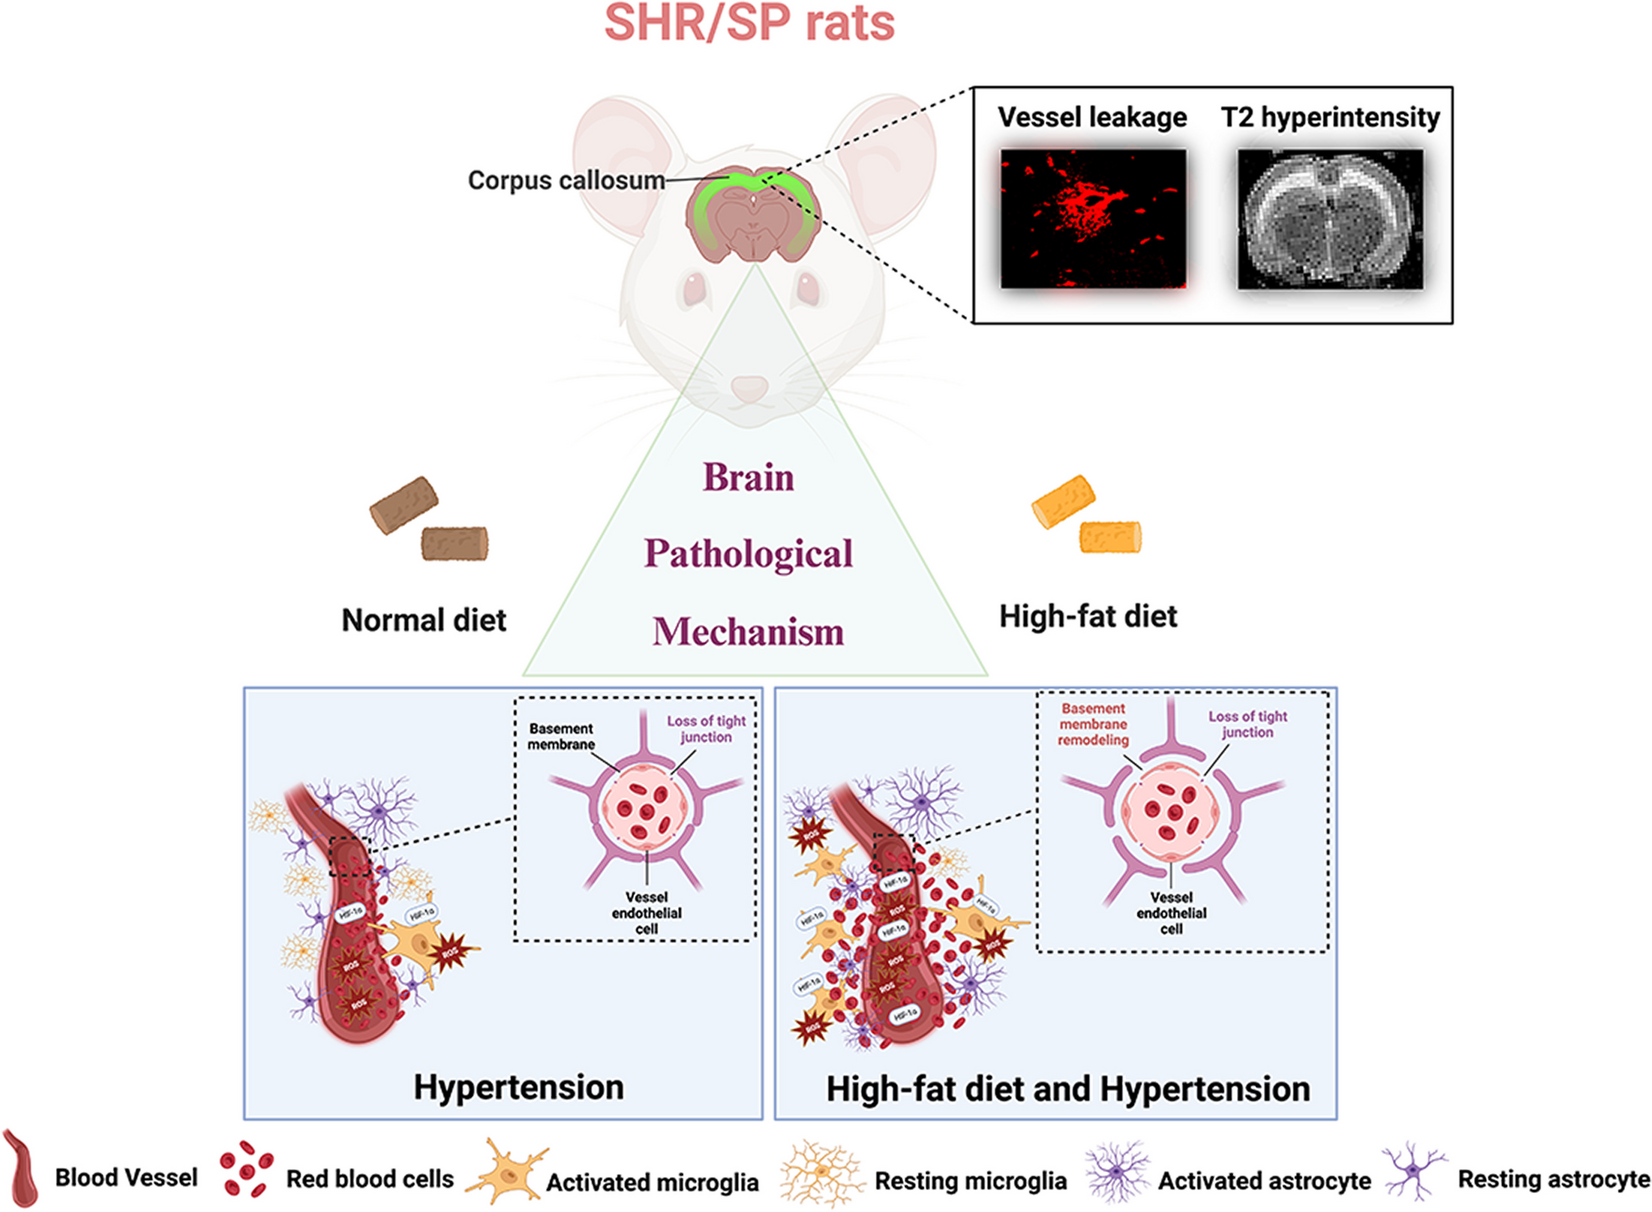 Effect of high-fat diet on cerebral pathological changes of cerebral small vessel disease in SHR/SP rats